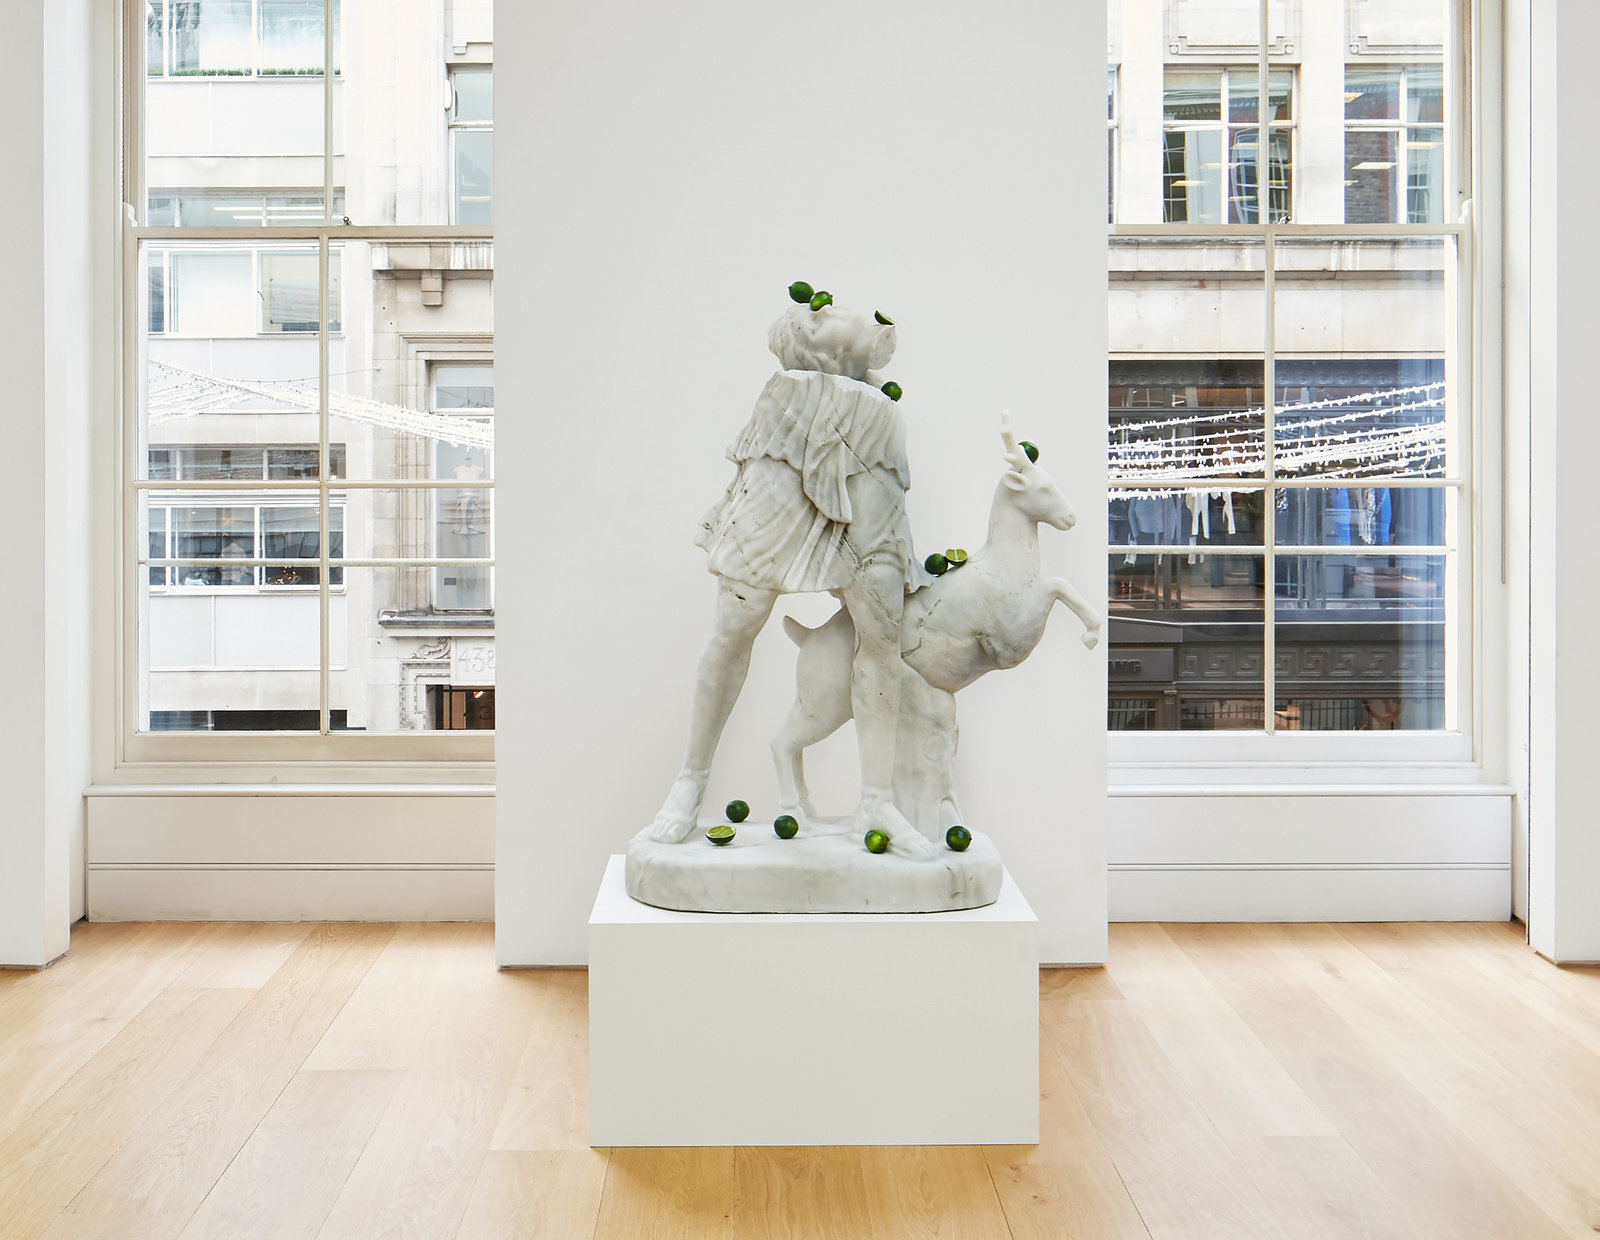 Matelli, diana, 2017, marble, cast glass and painted bronze, 72 x 37 x 20 in., 182.9 x 94 x 50.8 cm, cnon 59.390 (installed)